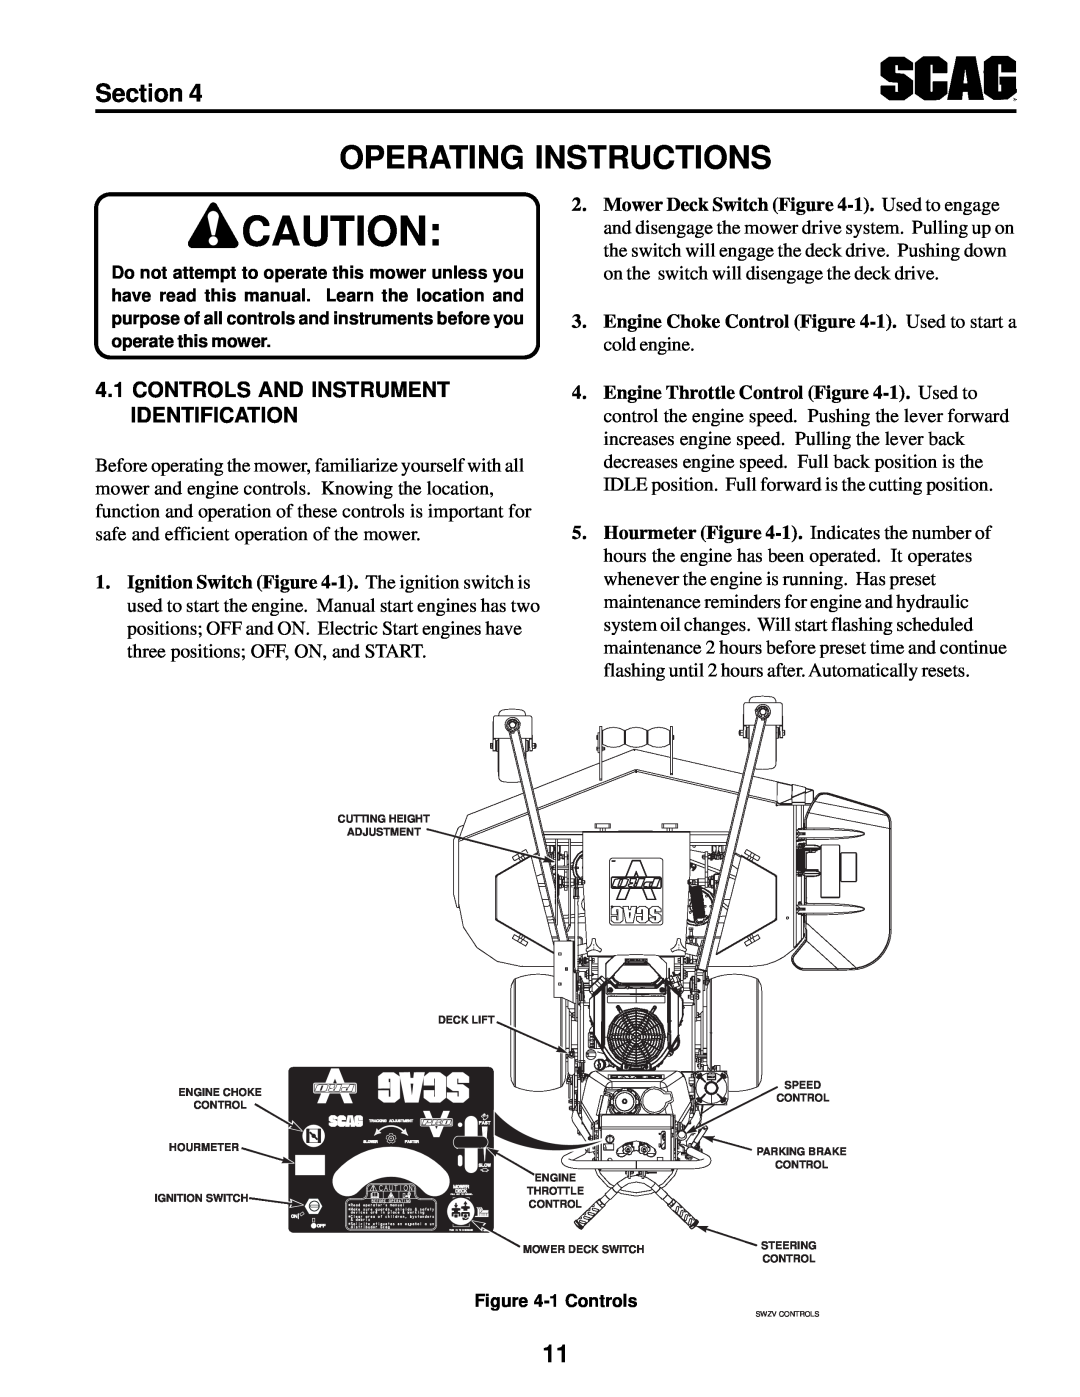 Scag Power Equipment SWZV manual Operating Instructions, Section, Controls And Instrument Identification 